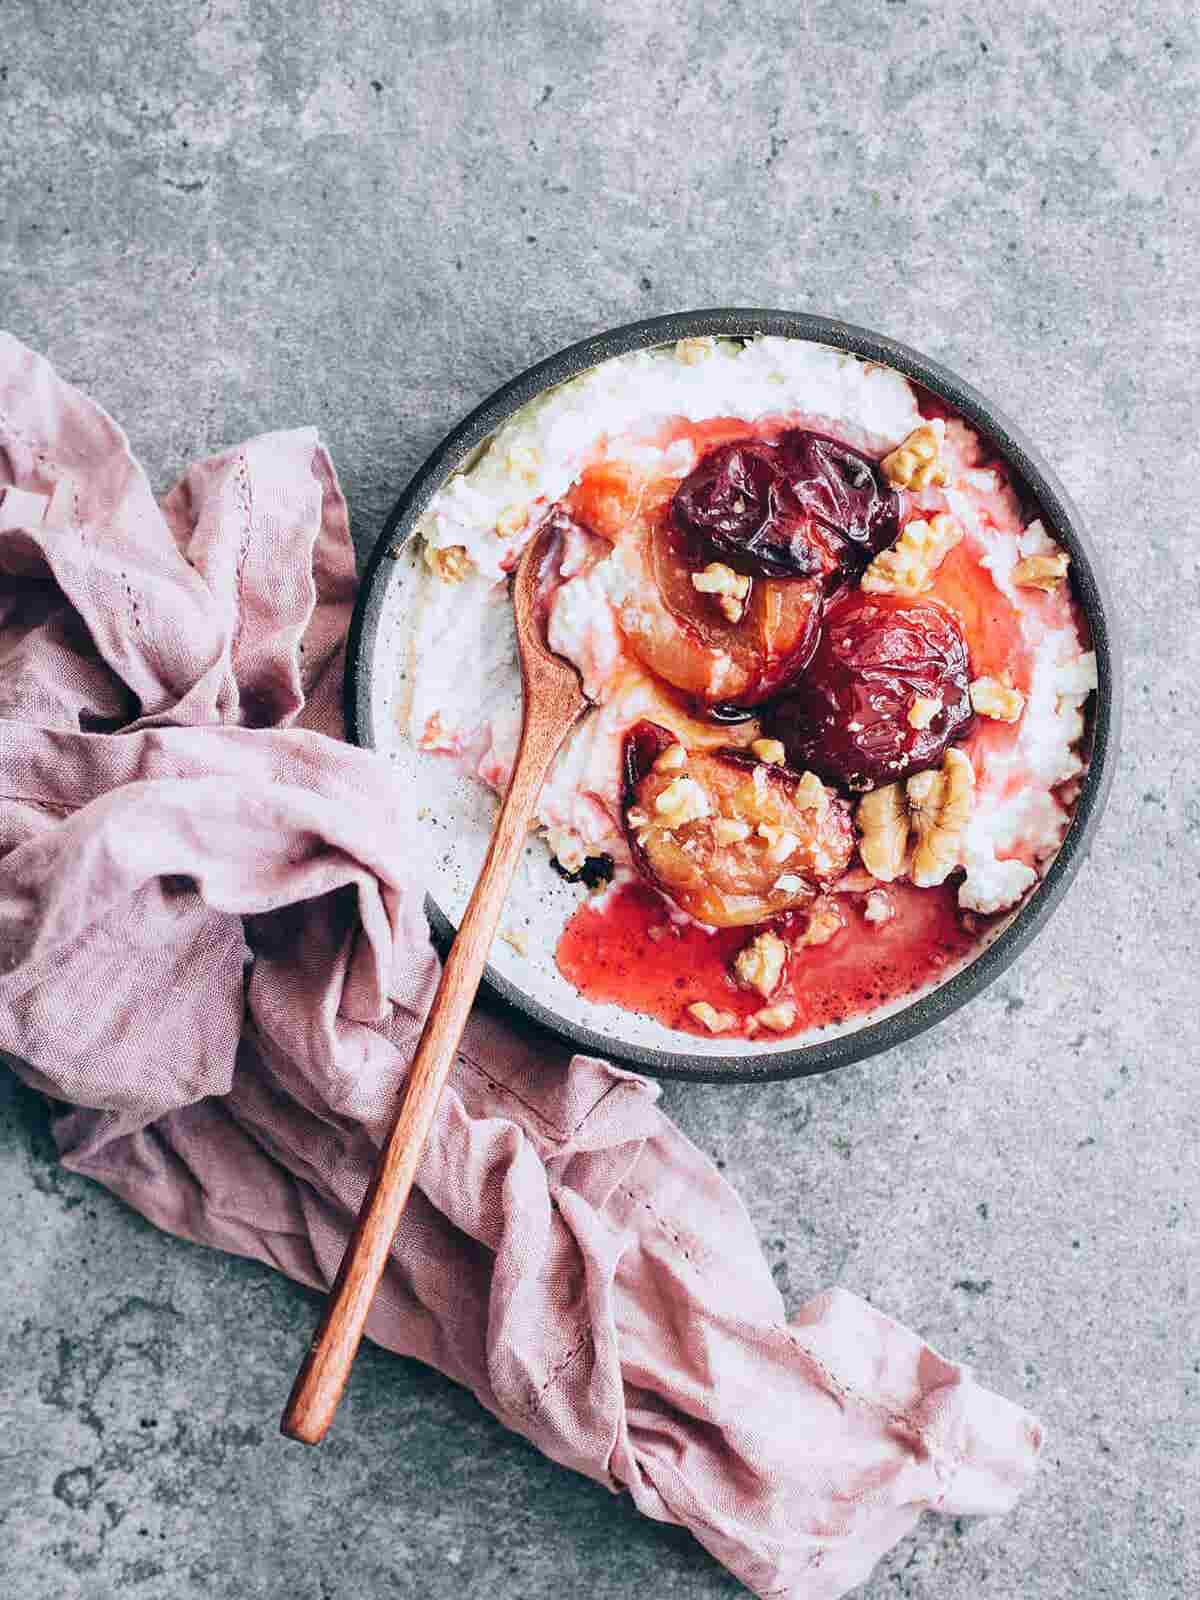 10 Stone Fruit Recipes That’ll Make You Run (Not Walk) to the Farmers Market